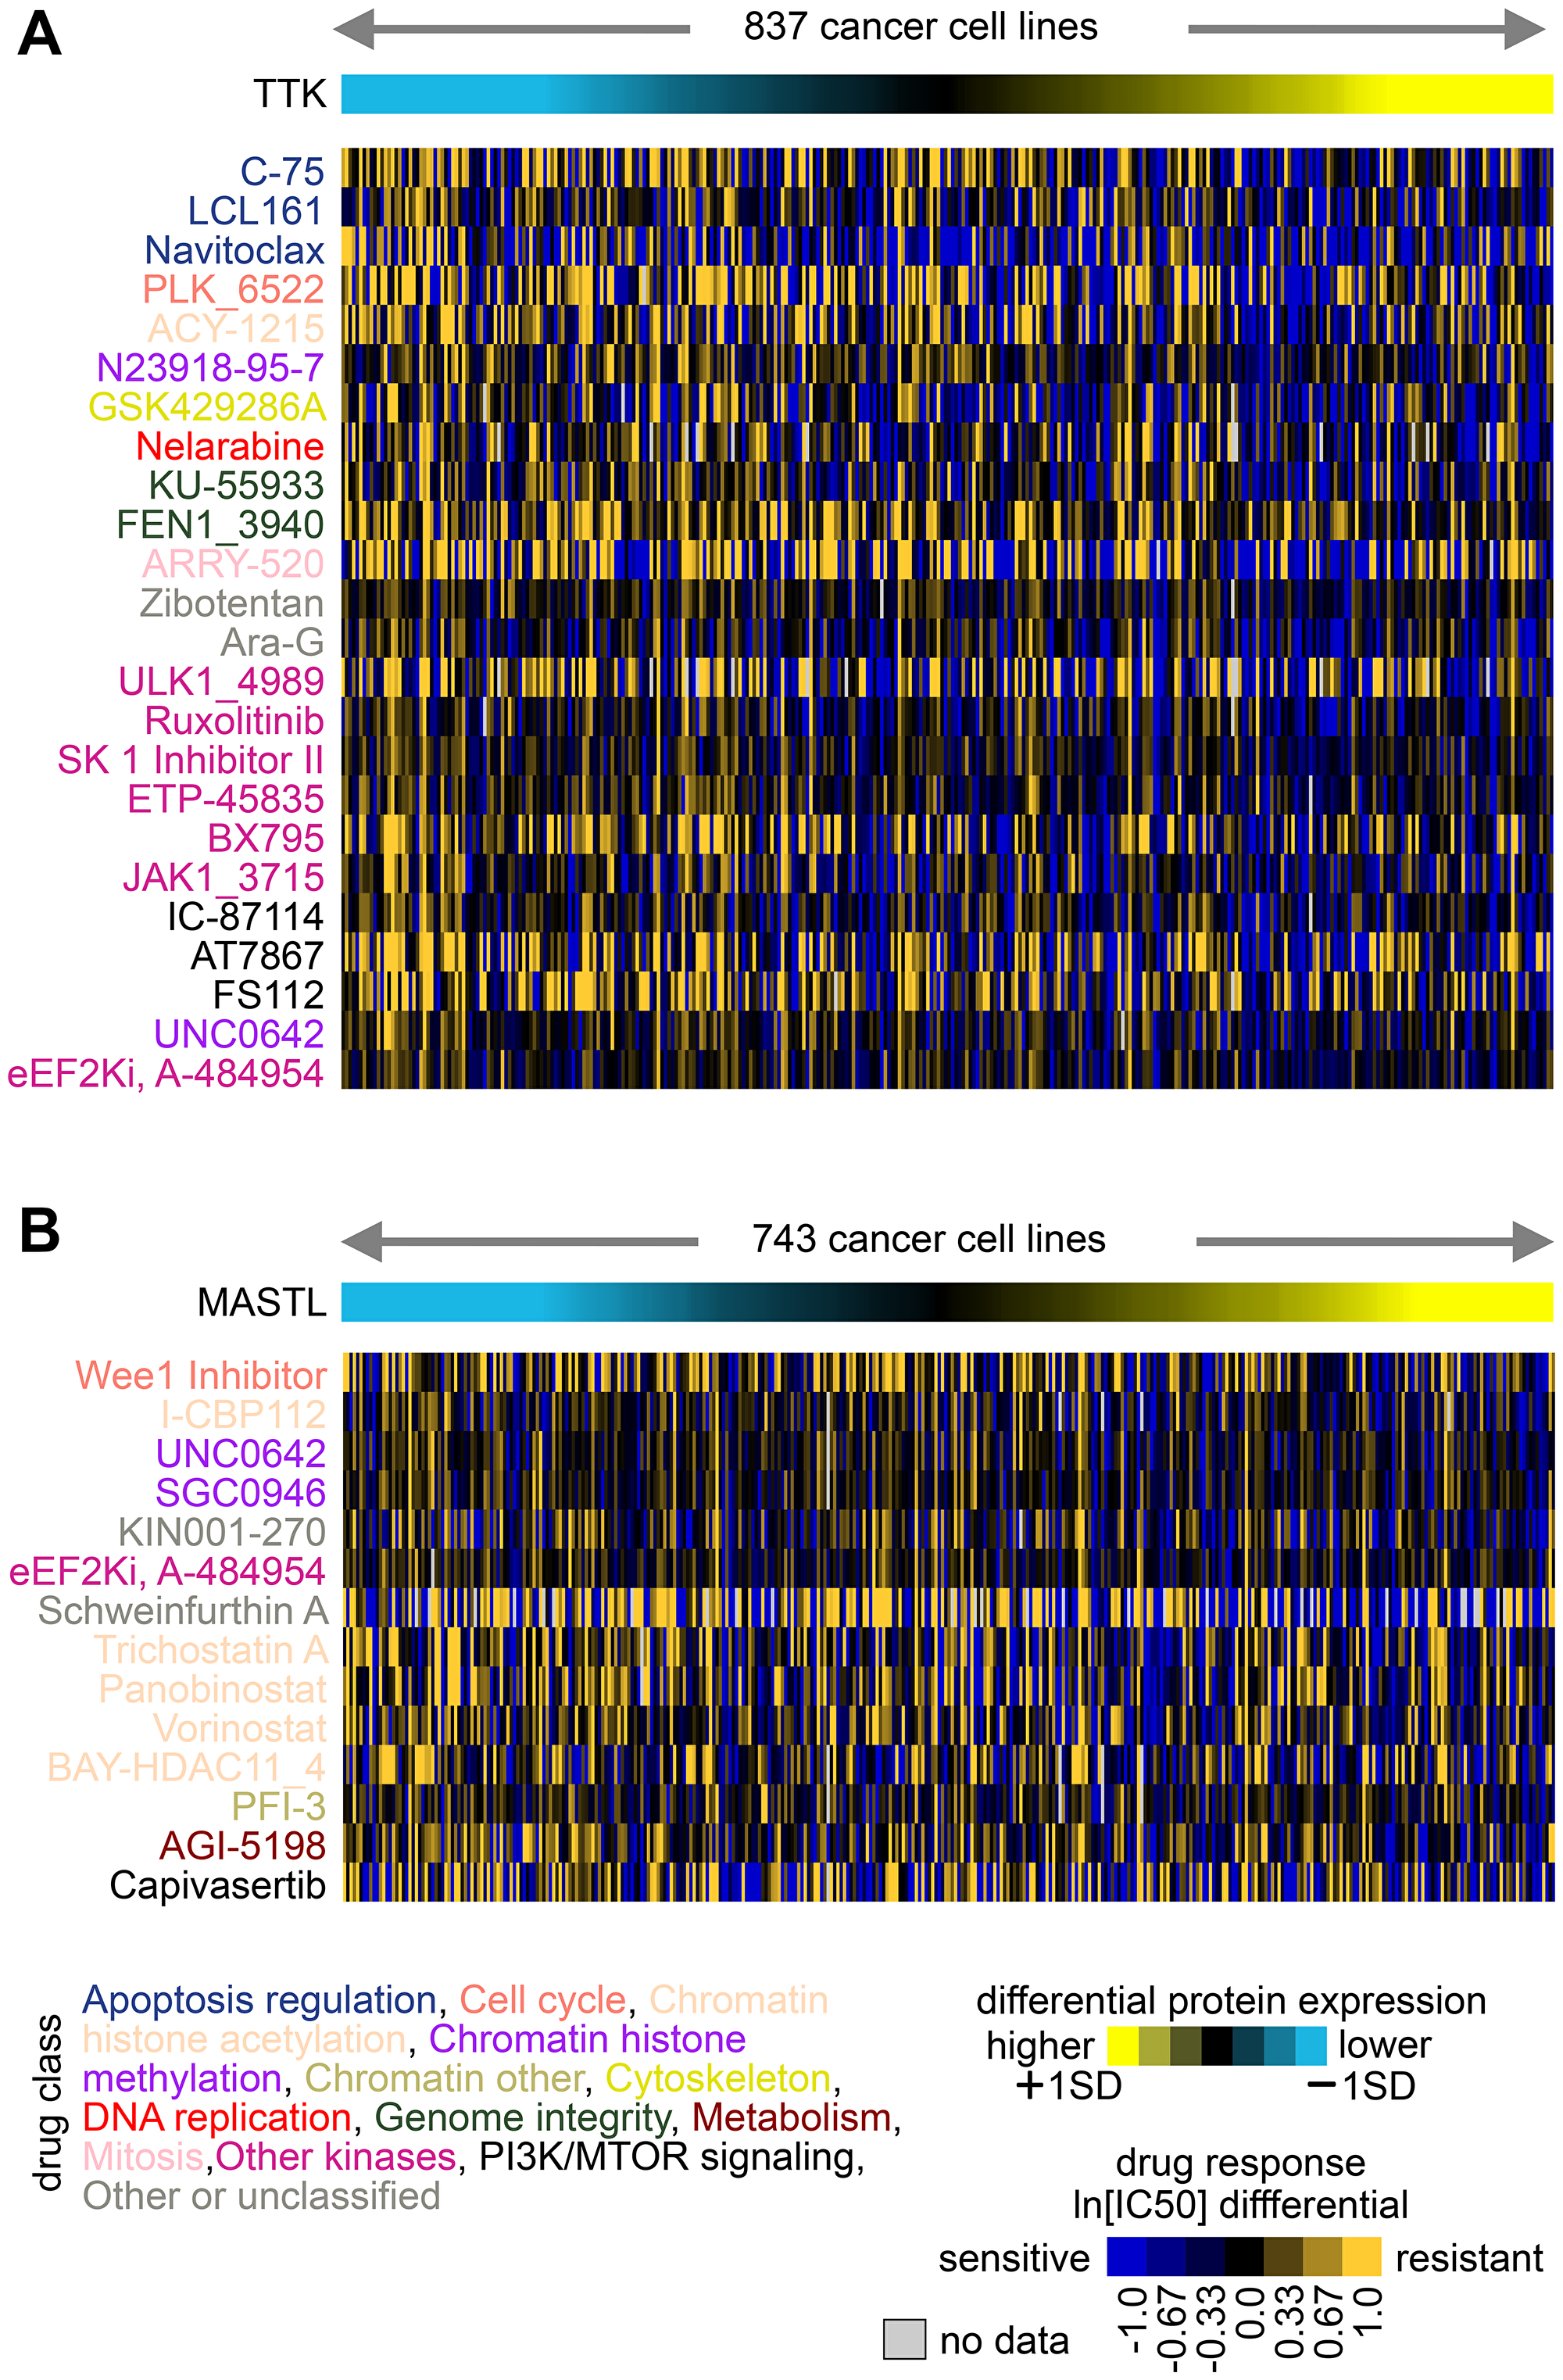 Associations of TTK and MASTL protein expression with drug responses across cancer cell lines.